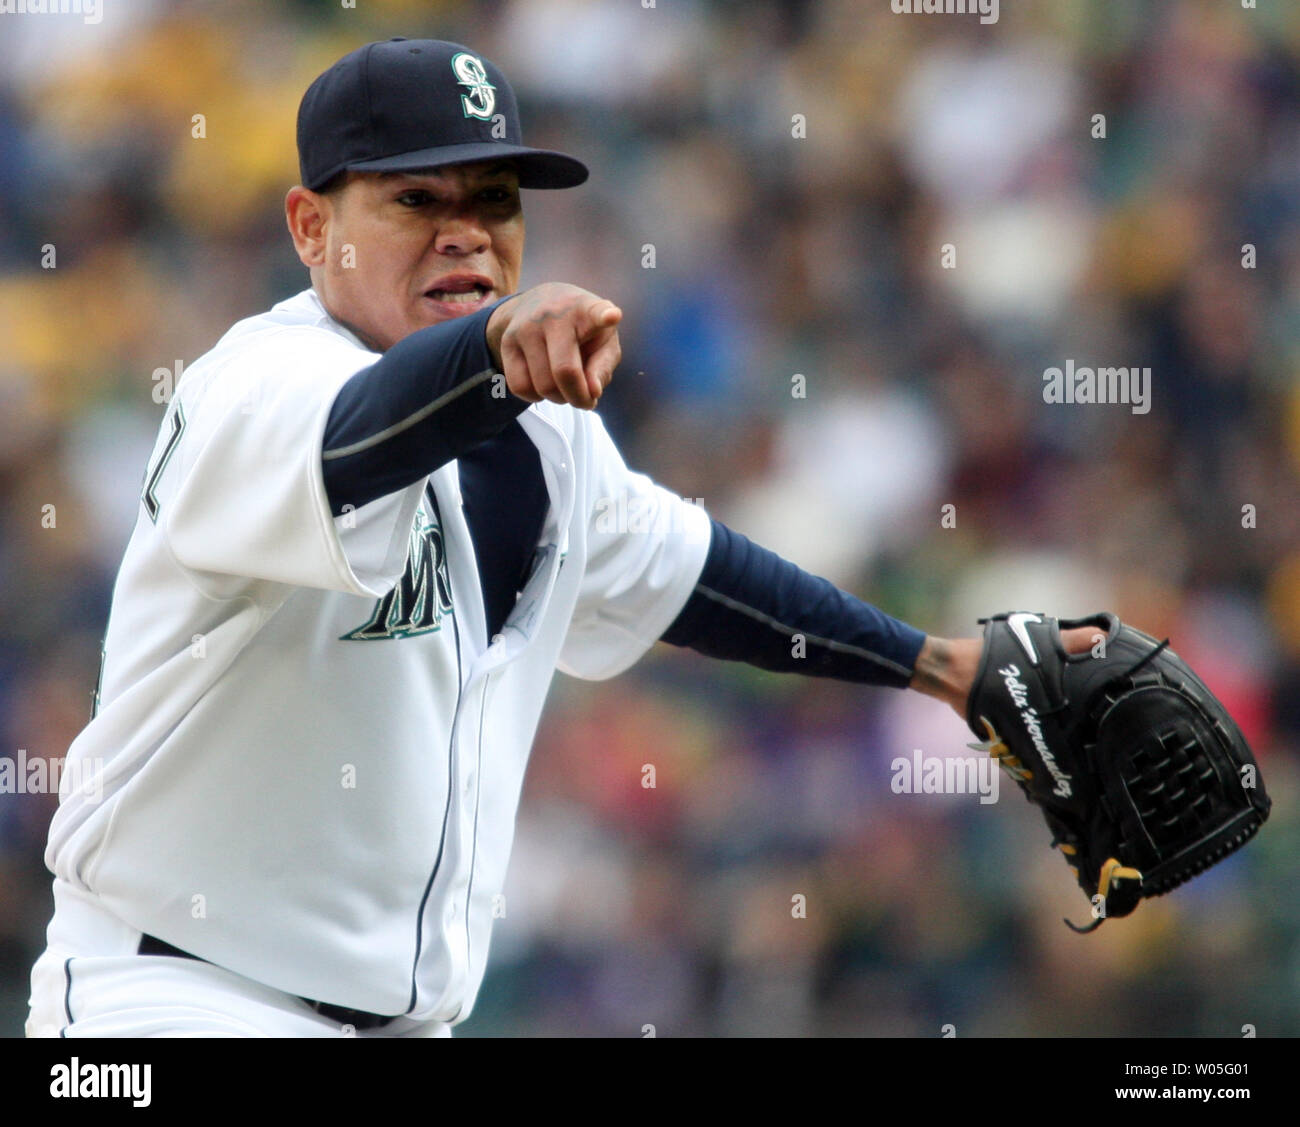 Seattle Mariners' starting pitcher Felix Hernandez gets ready to